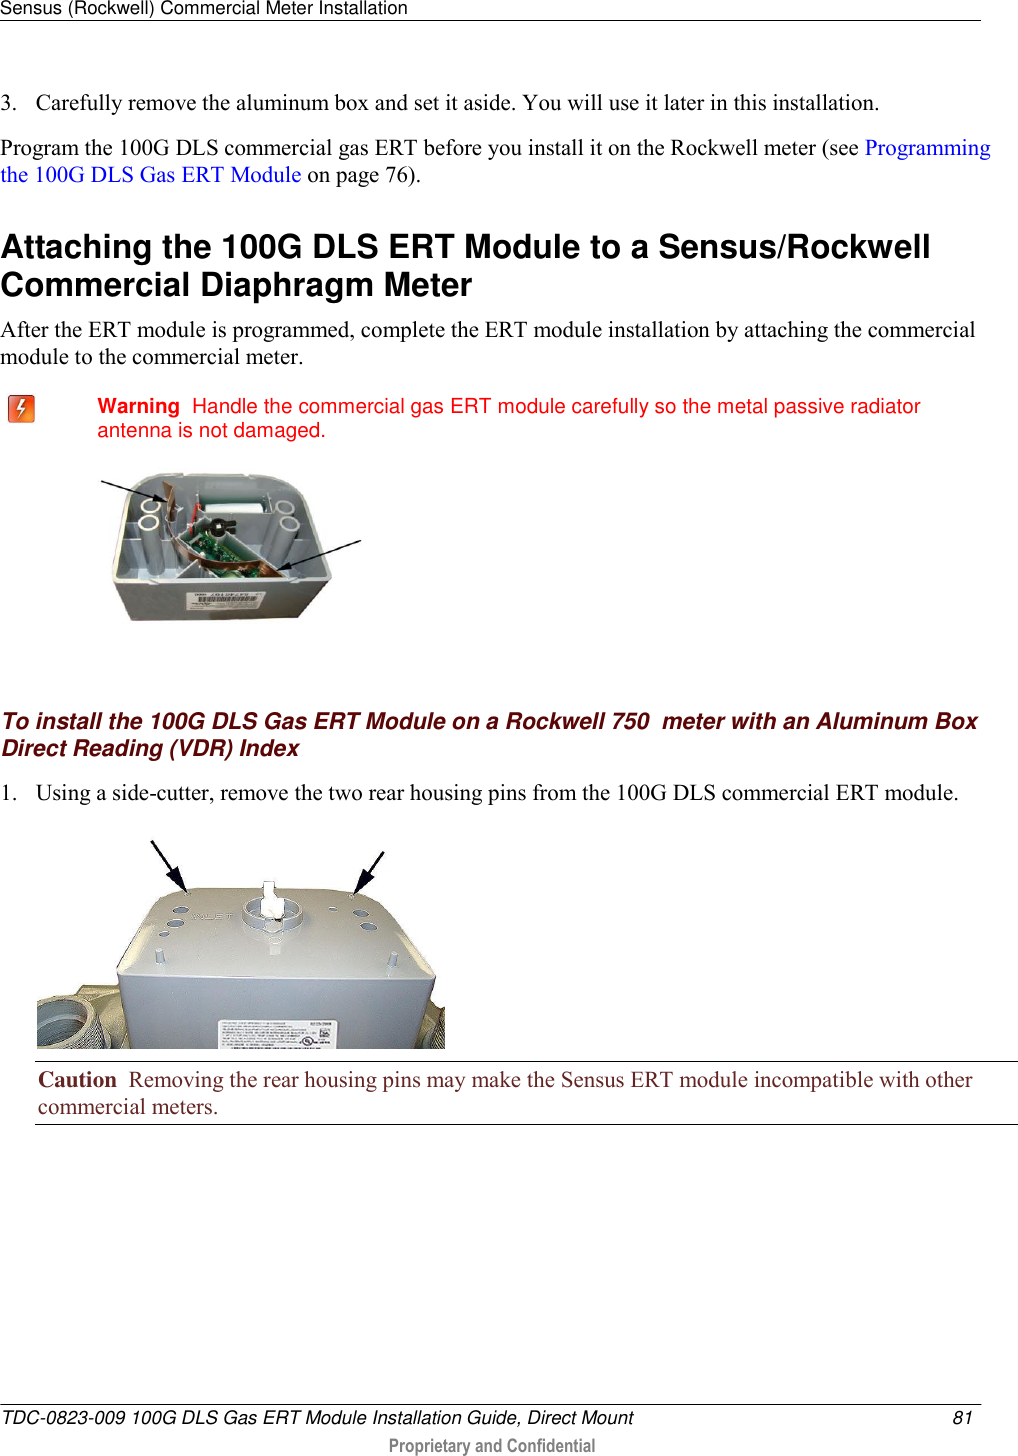 Sensus (Rockwell) Commercial Meter Installation   TDC-0823-009 100G DLS Gas ERT Module Installation Guide, Direct Mount  81   Proprietary and Confidential     3. Carefully remove the aluminum box and set it aside. You will use it later in this installation. Program the 100G DLS commercial gas ERT before you install it on the Rockwell meter (see Programming the 100G DLS Gas ERT Module on page 76).  Attaching the 100G DLS ERT Module to a Sensus/Rockwell Commercial Diaphragm Meter After the ERT module is programmed, complete the ERT module installation by attaching the commercial module to the commercial meter.    Warning  Handle the commercial gas ERT module carefully so the metal passive radiator antenna is not damaged.    To install the 100G DLS Gas ERT Module on a Rockwell 750  meter with an Aluminum Box Direct Reading (VDR) Index 1. Using a side-cutter, remove the two rear housing pins from the 100G DLS commercial ERT module.  Caution  Removing the rear housing pins may make the Sensus ERT module incompatible with other commercial meters. 